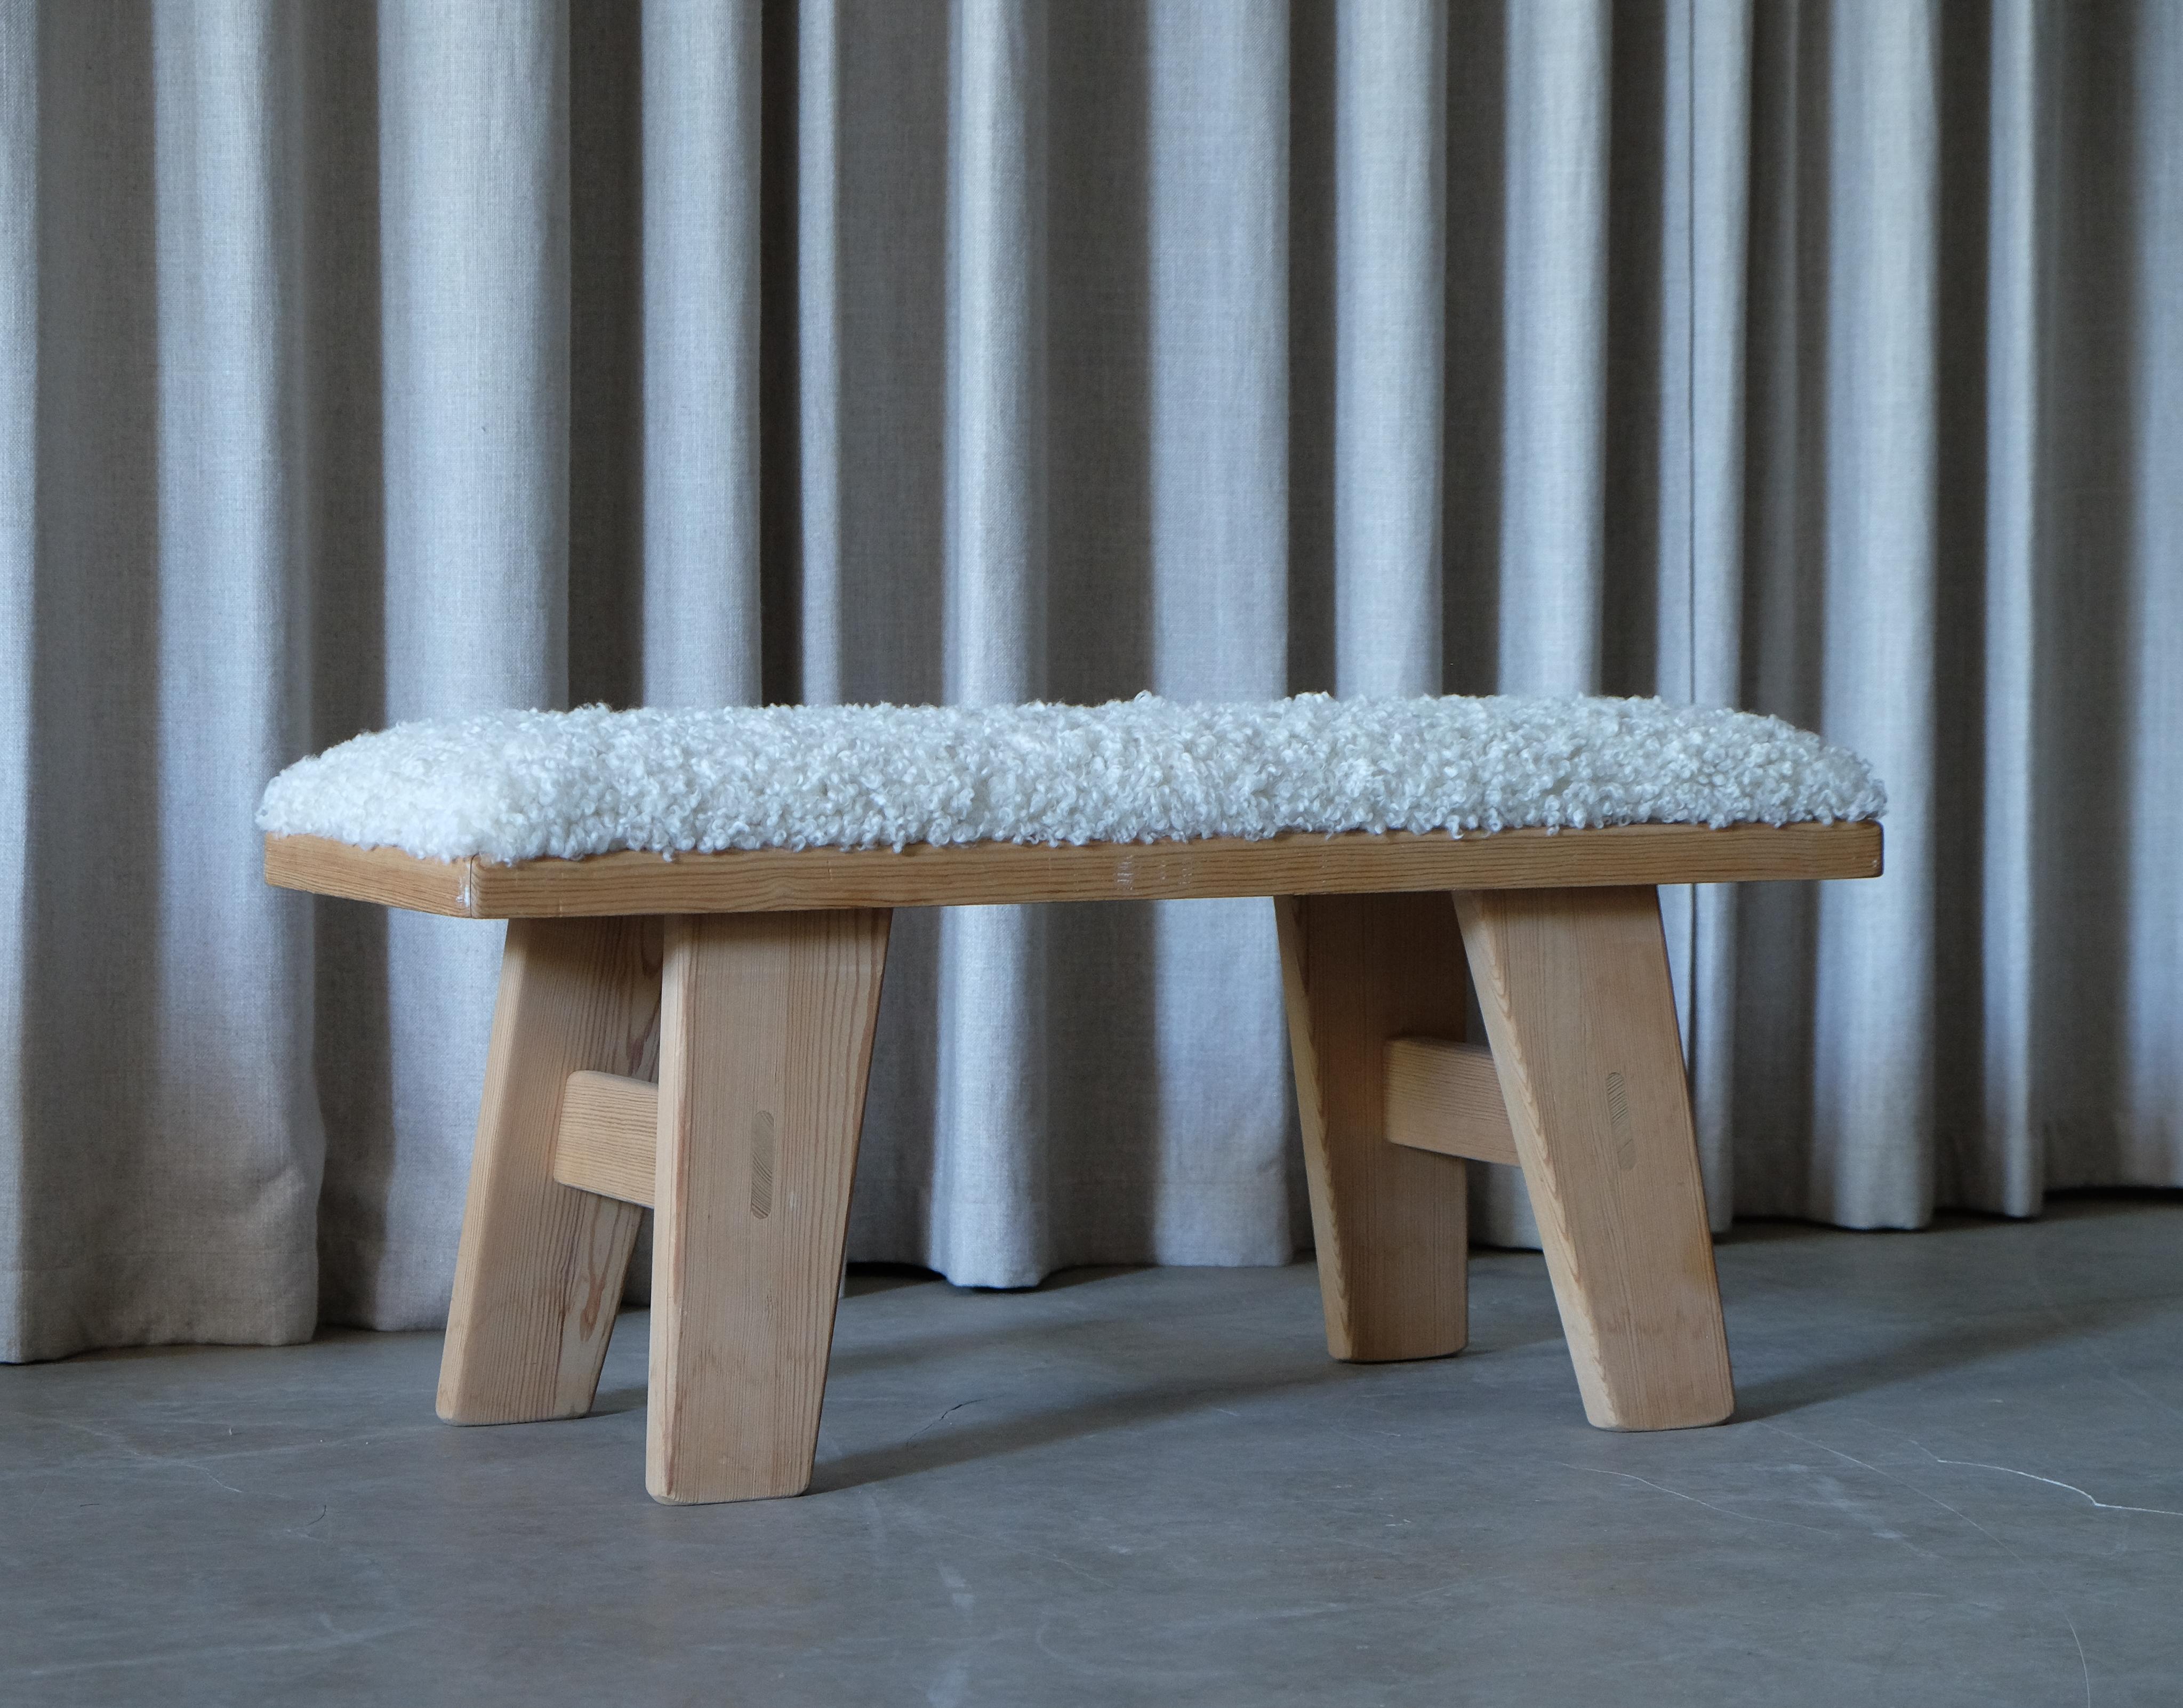 Pine bench by Krogenäs, newly upholstered in sheepskin. Produced in Norway.